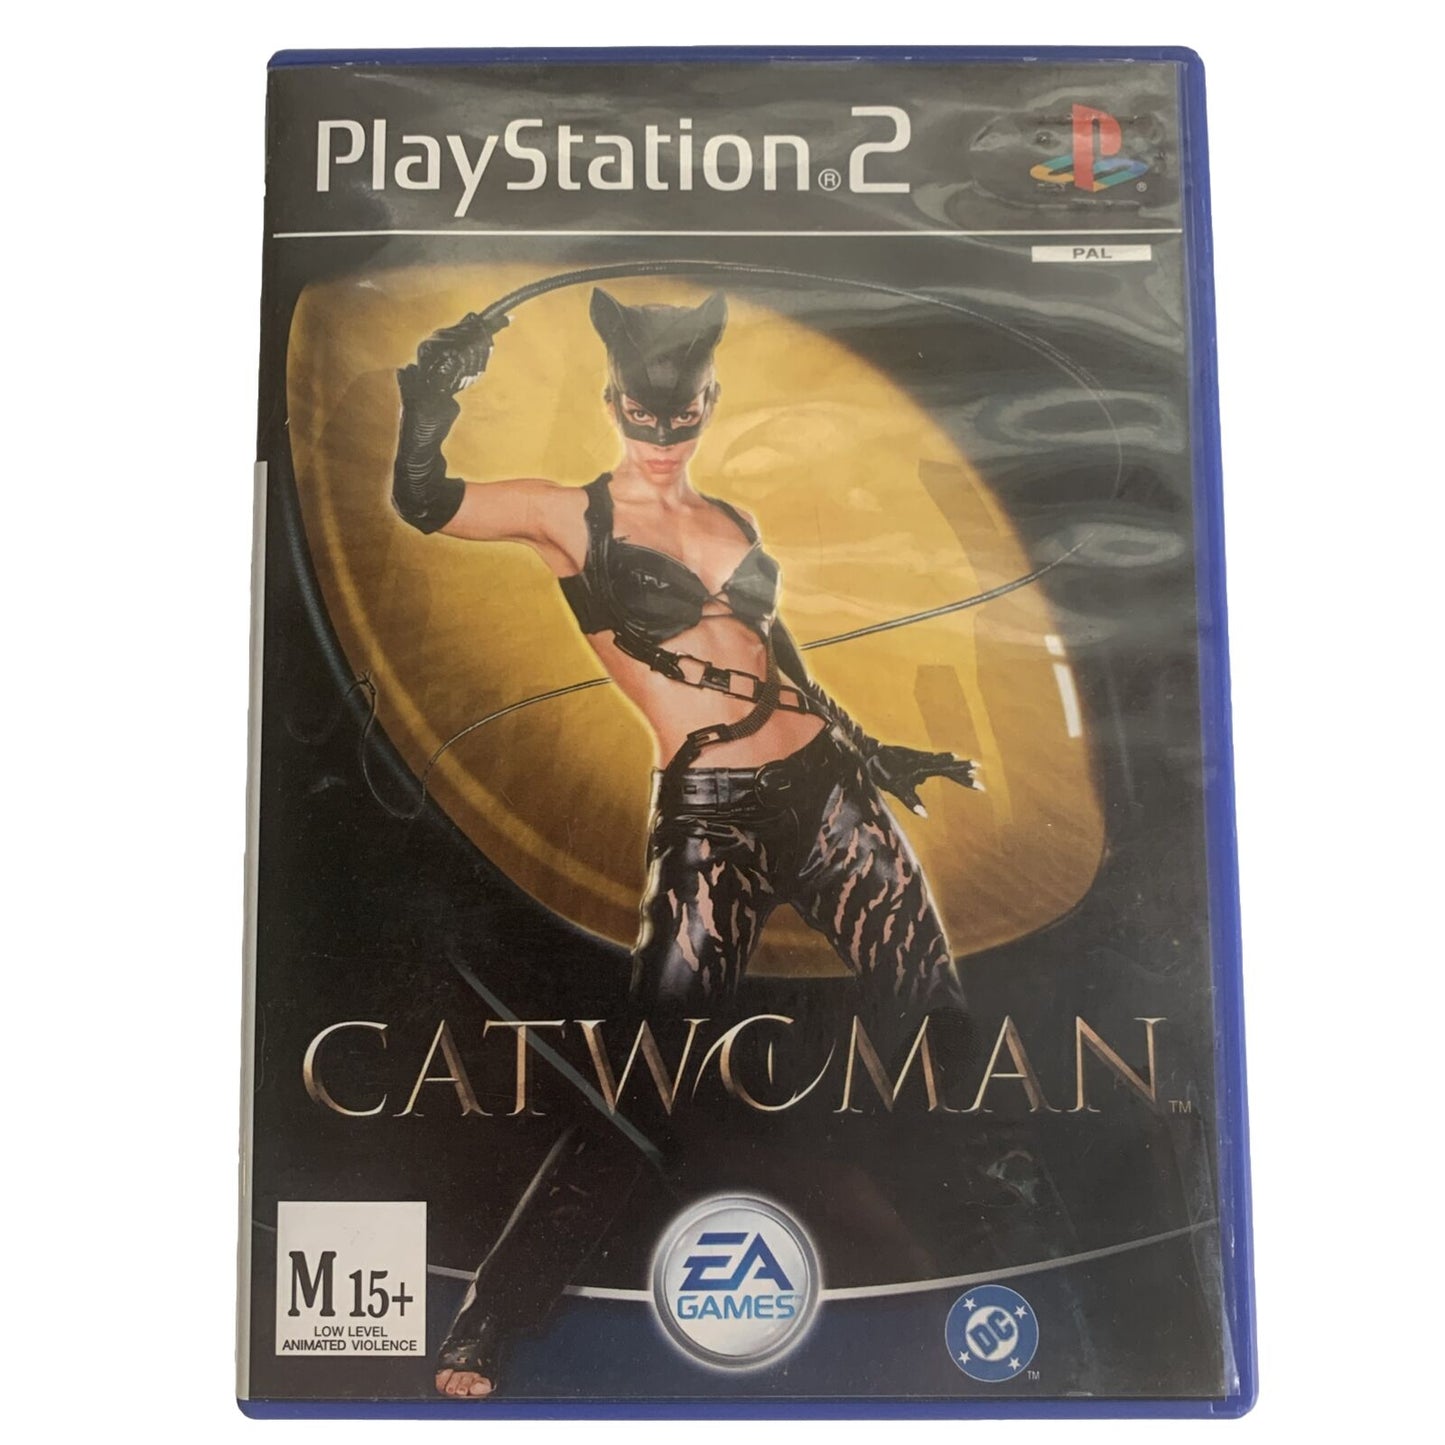 Catwoman PlayStation 2 PS2 Game